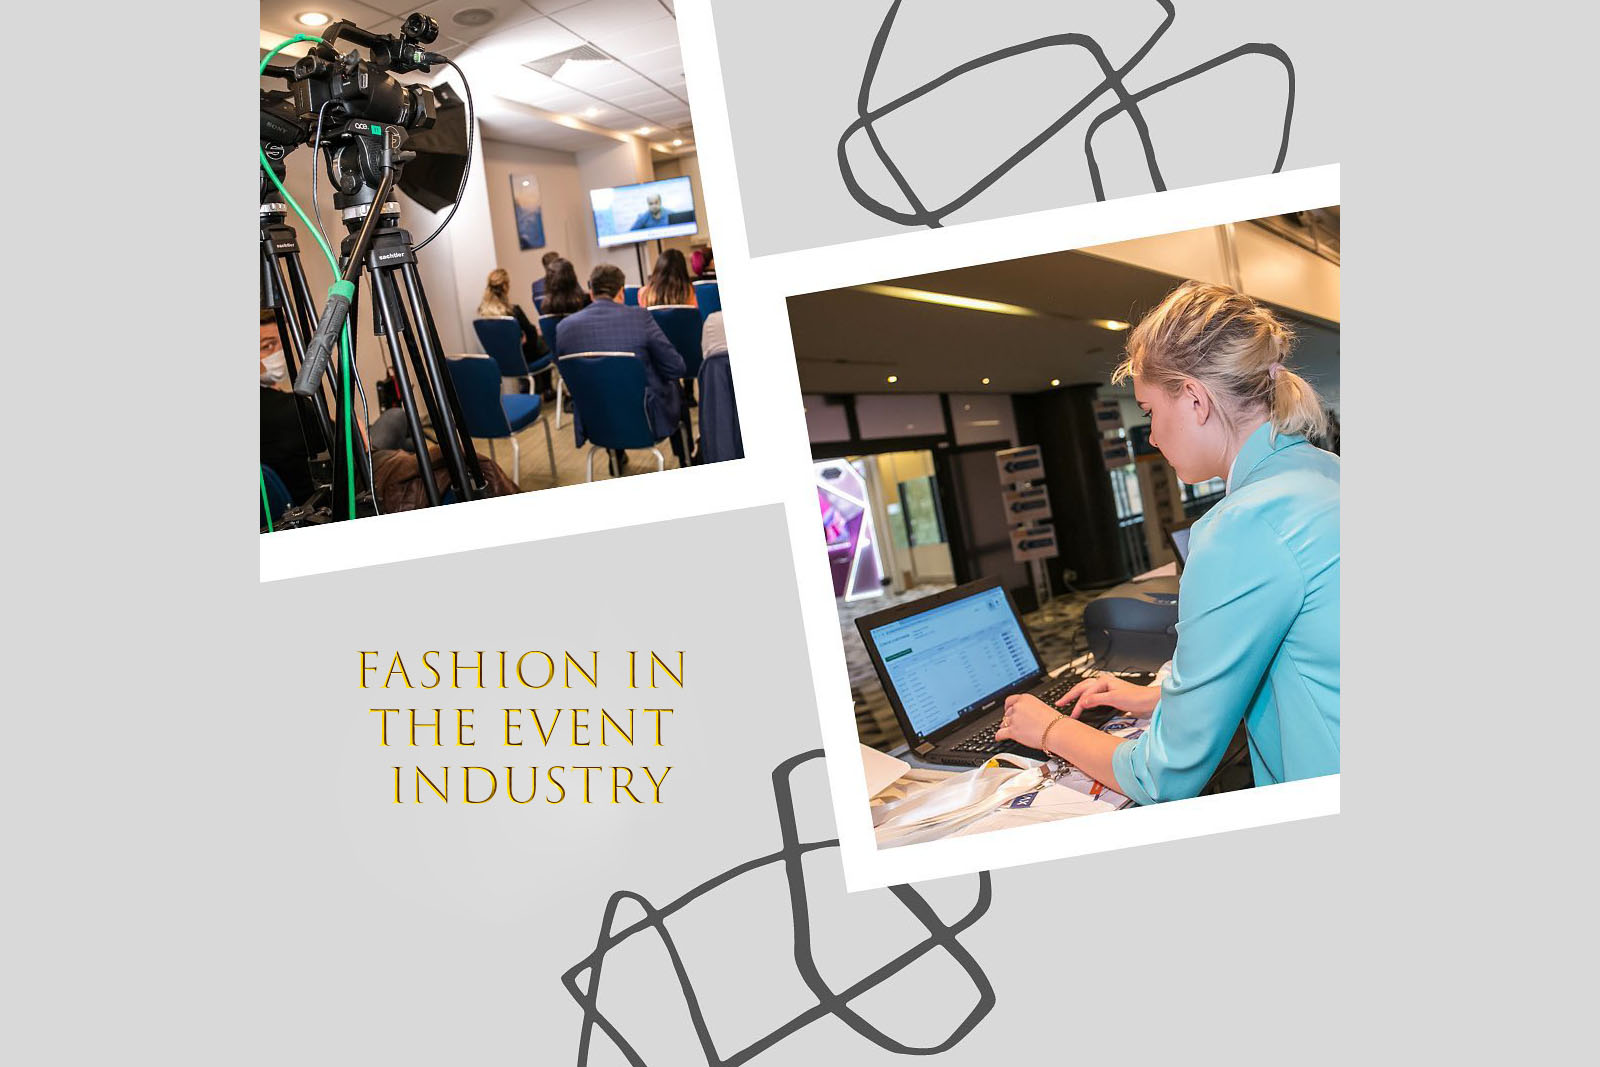 Fashion in the event industry